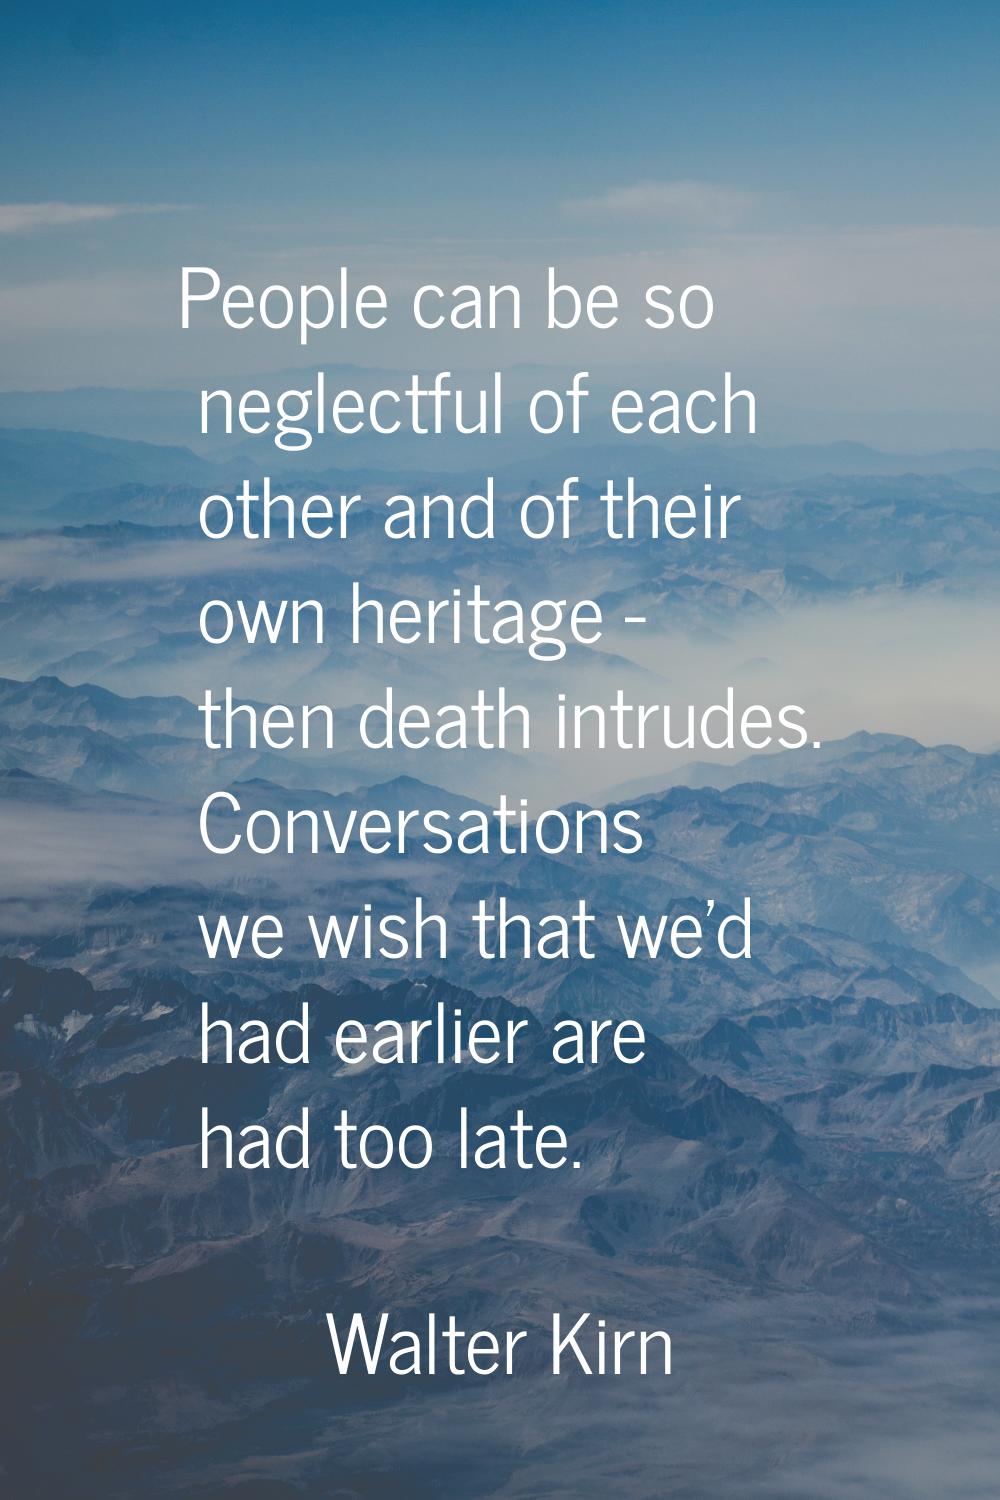 People can be so neglectful of each other and of their own heritage - then death intrudes. Conversa